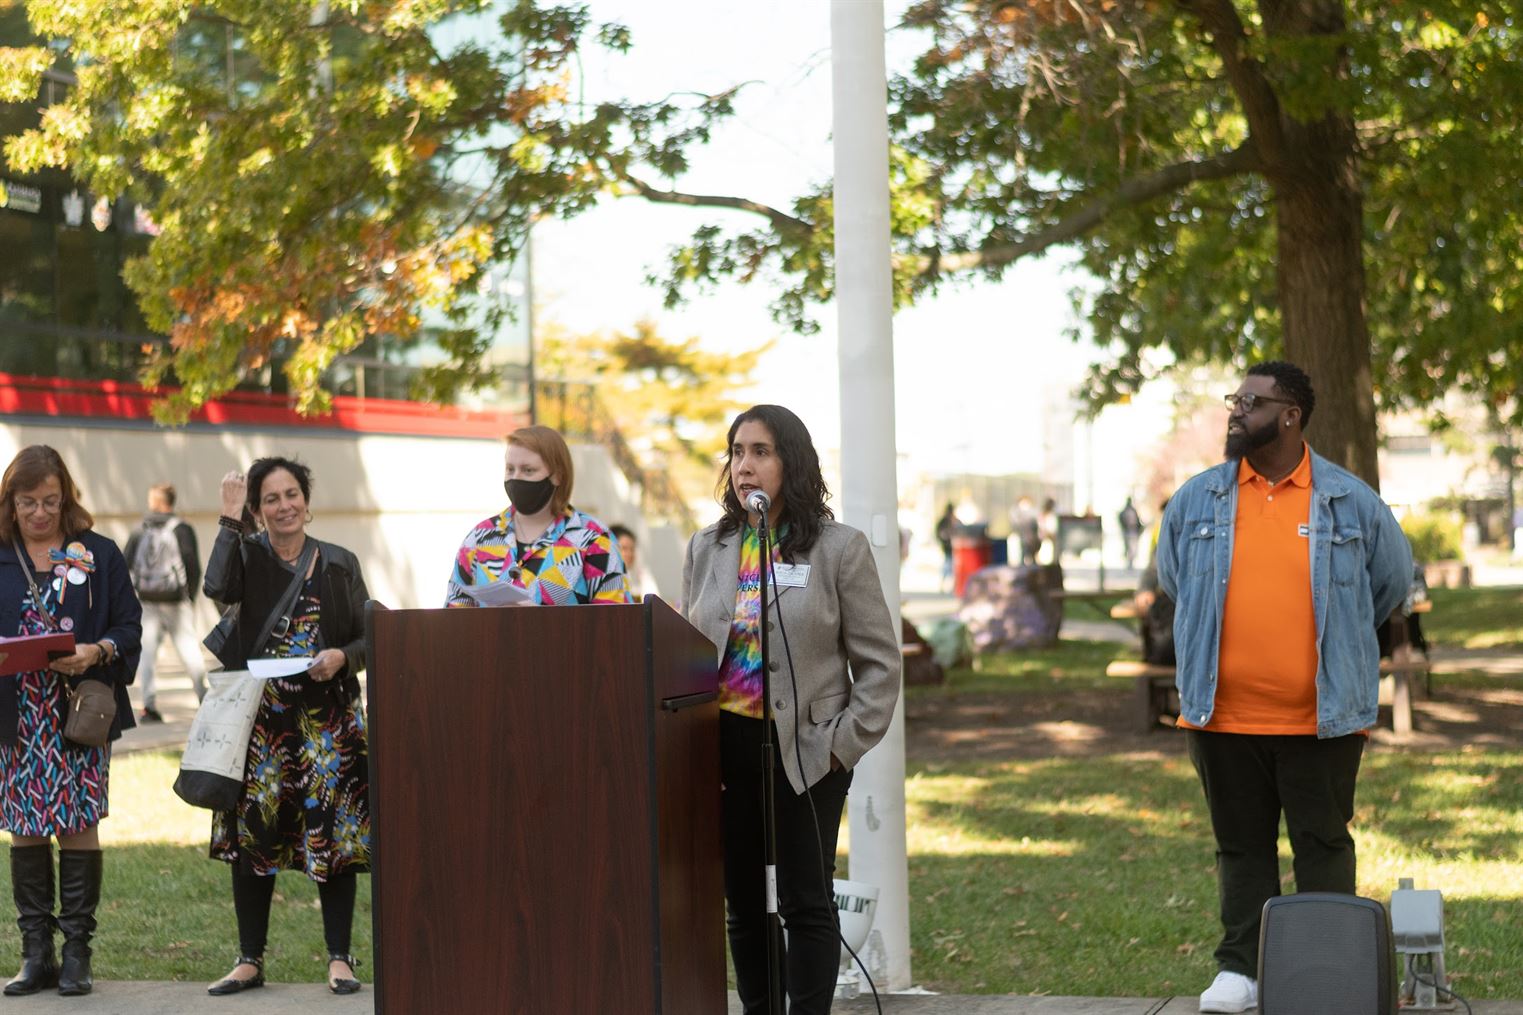 Staff and students from Montclair State University come to celebrate National Coming Out Day. Anna McCabe | The Montclarion